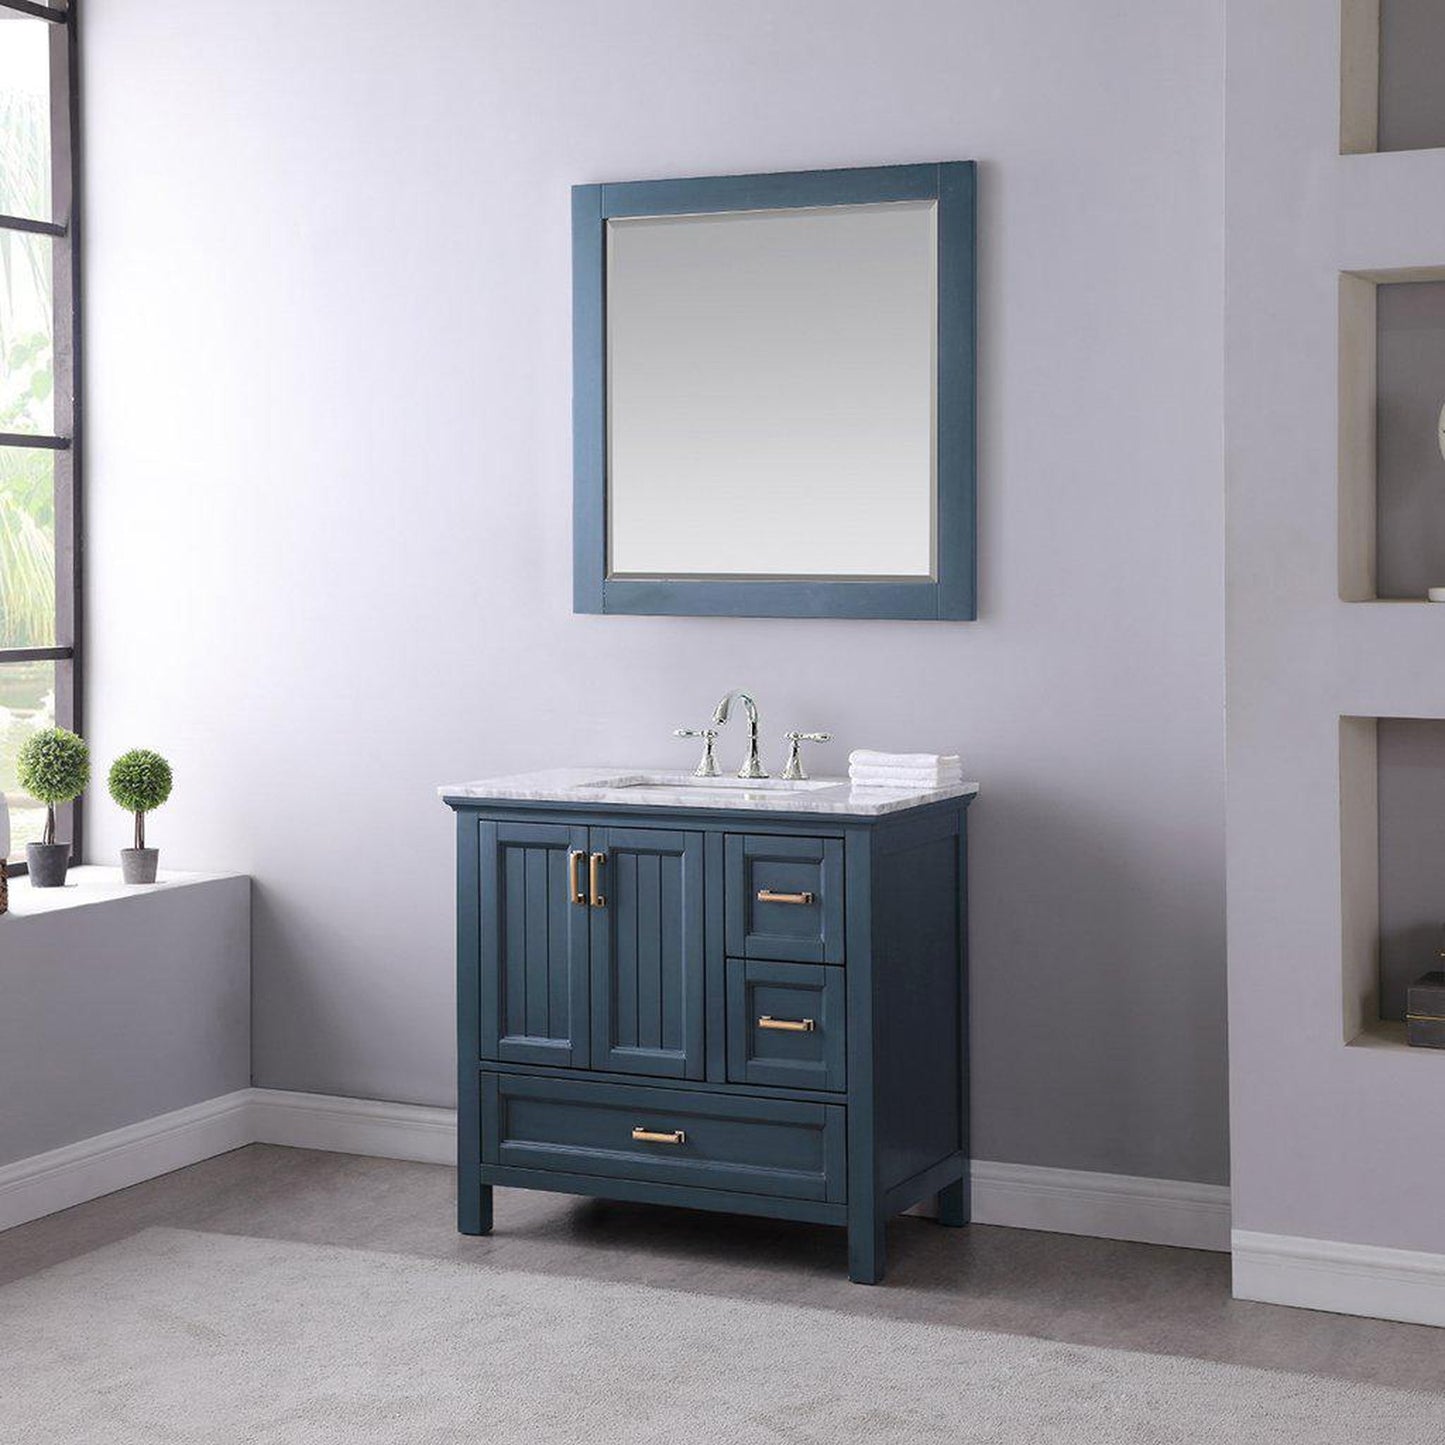 Altair Isla 36" Single Classic Blue Freestanding Bathroom Vanity Set With Mirror, Natural Carrara White Marble Top, Rectangular Undermount Ceramic Sink, and Overflow